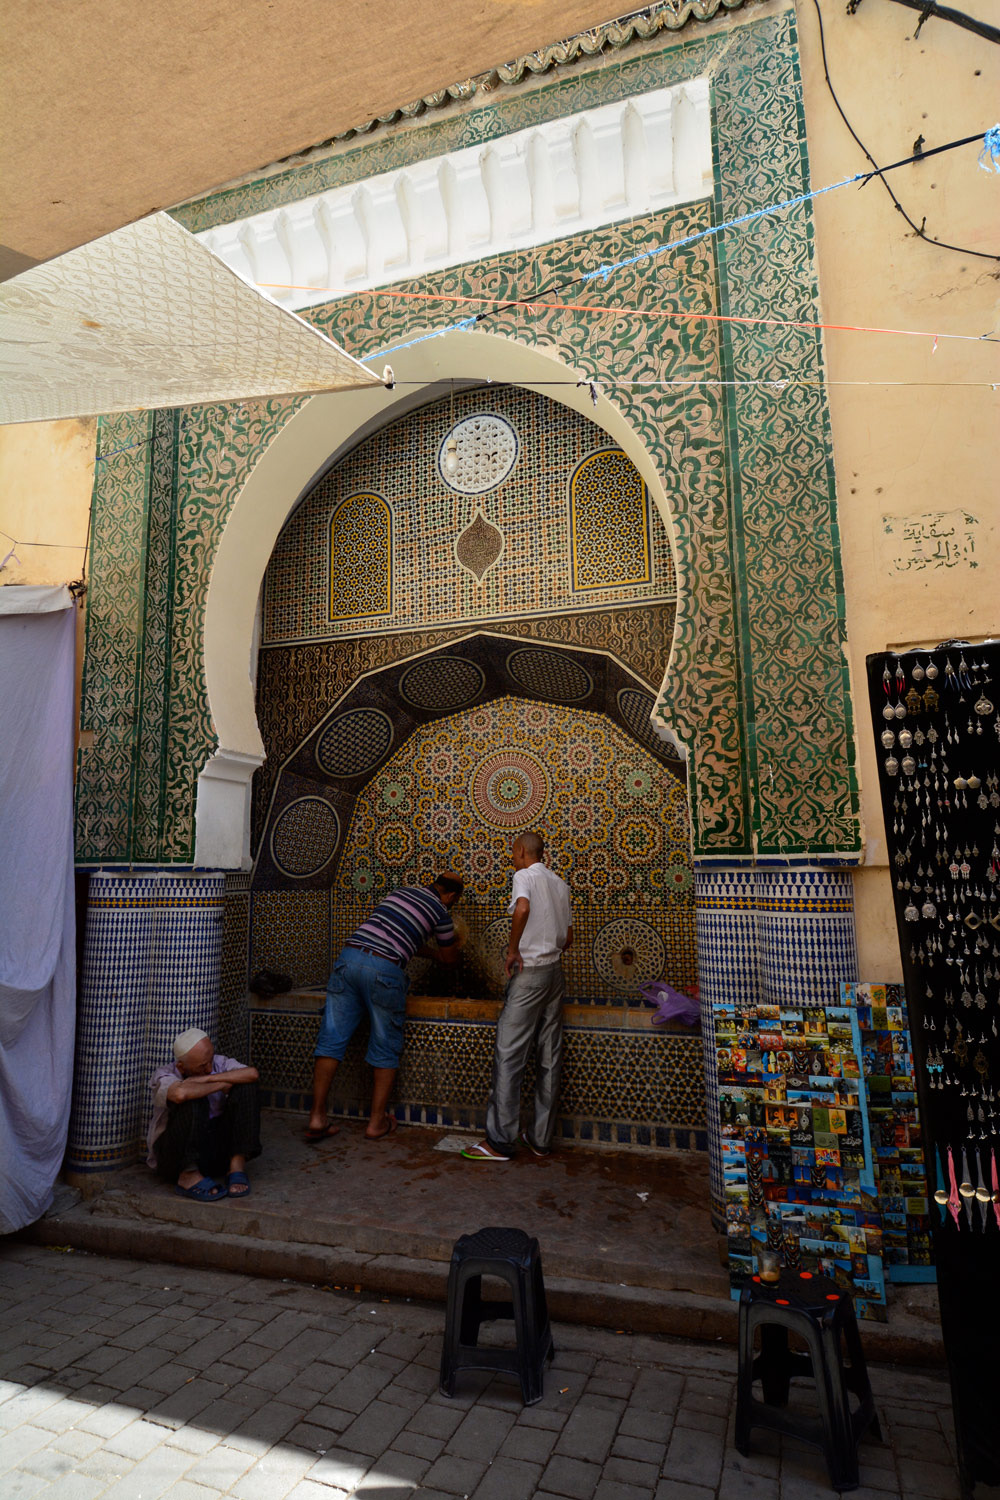 A public water fountain inset in a tiled niche inside Bab Bu Jallud.